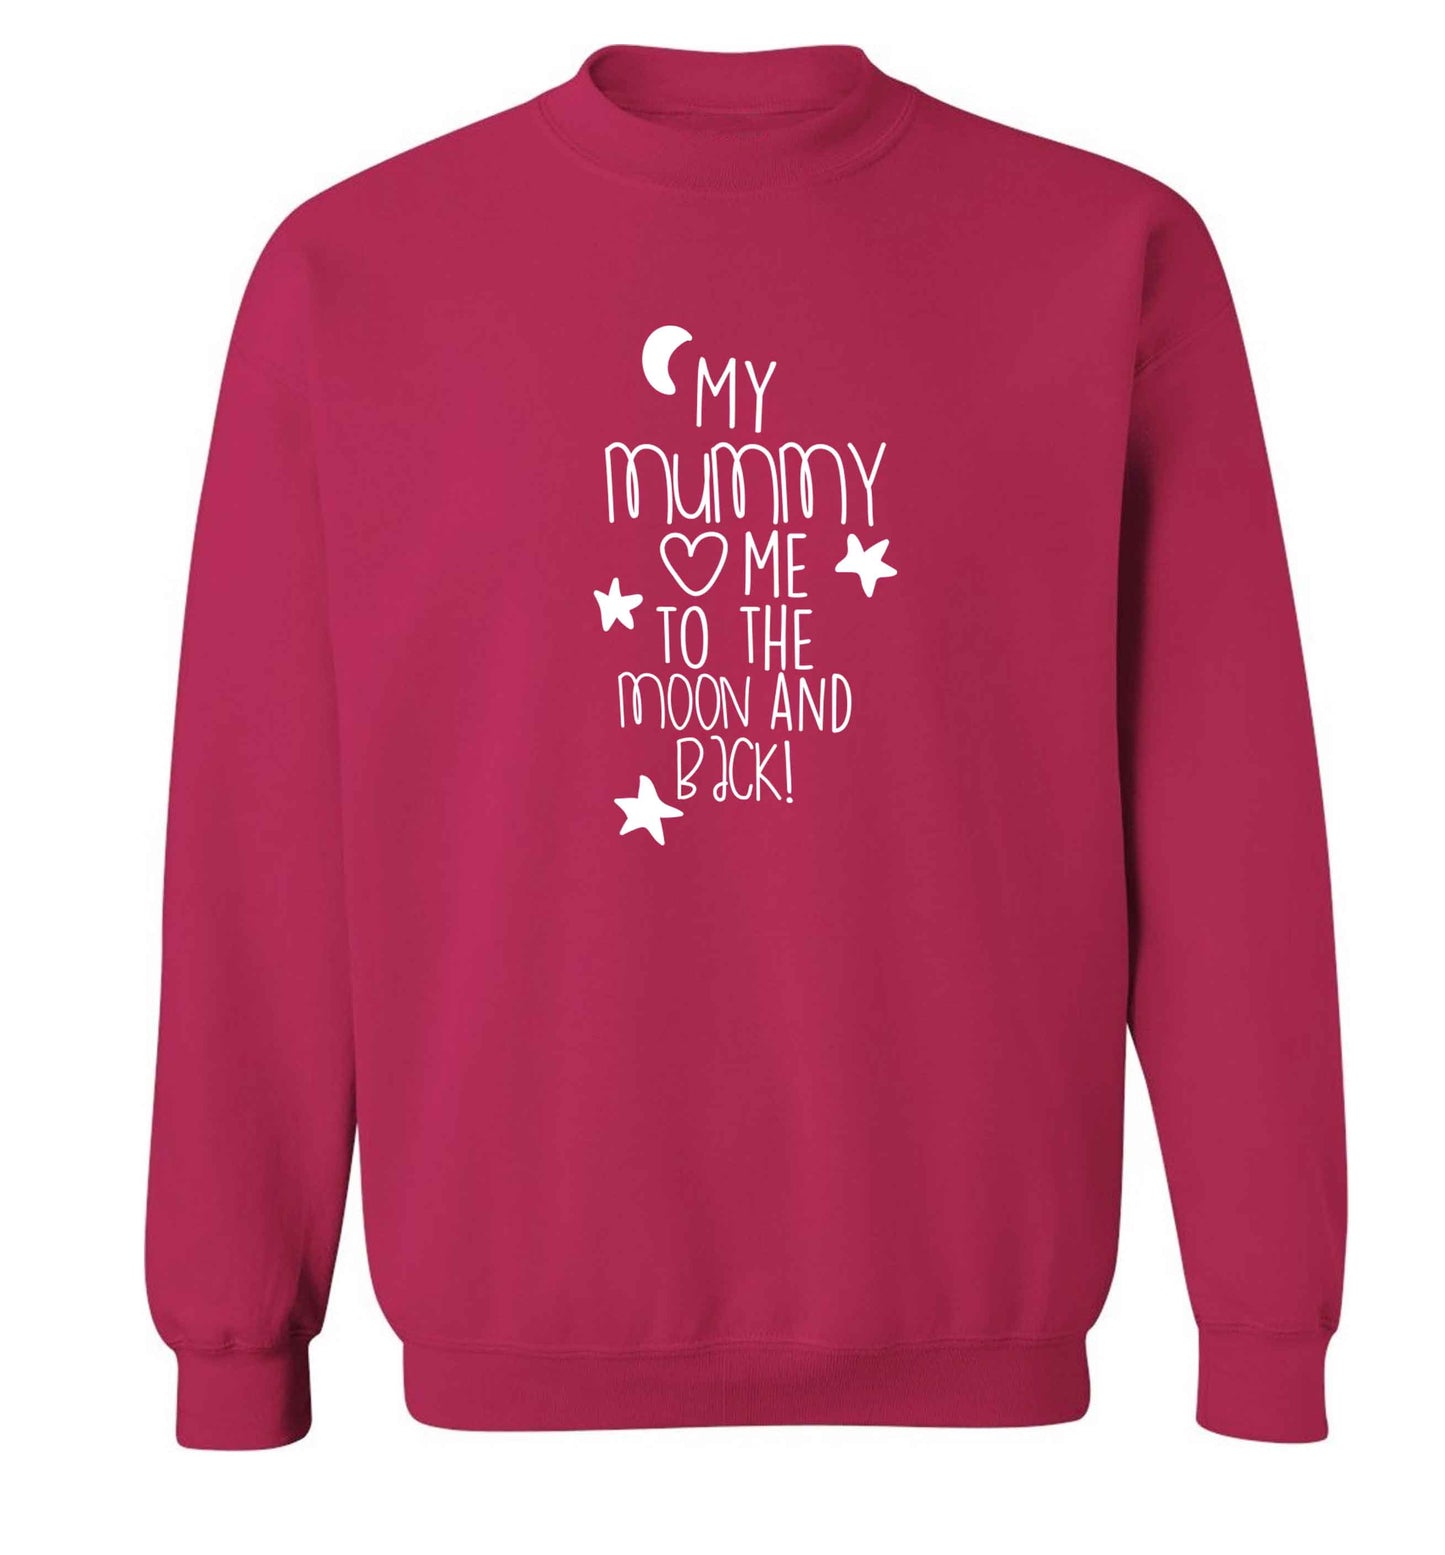 My mum loves me to the moon and back adult's unisex pink sweater 2XL